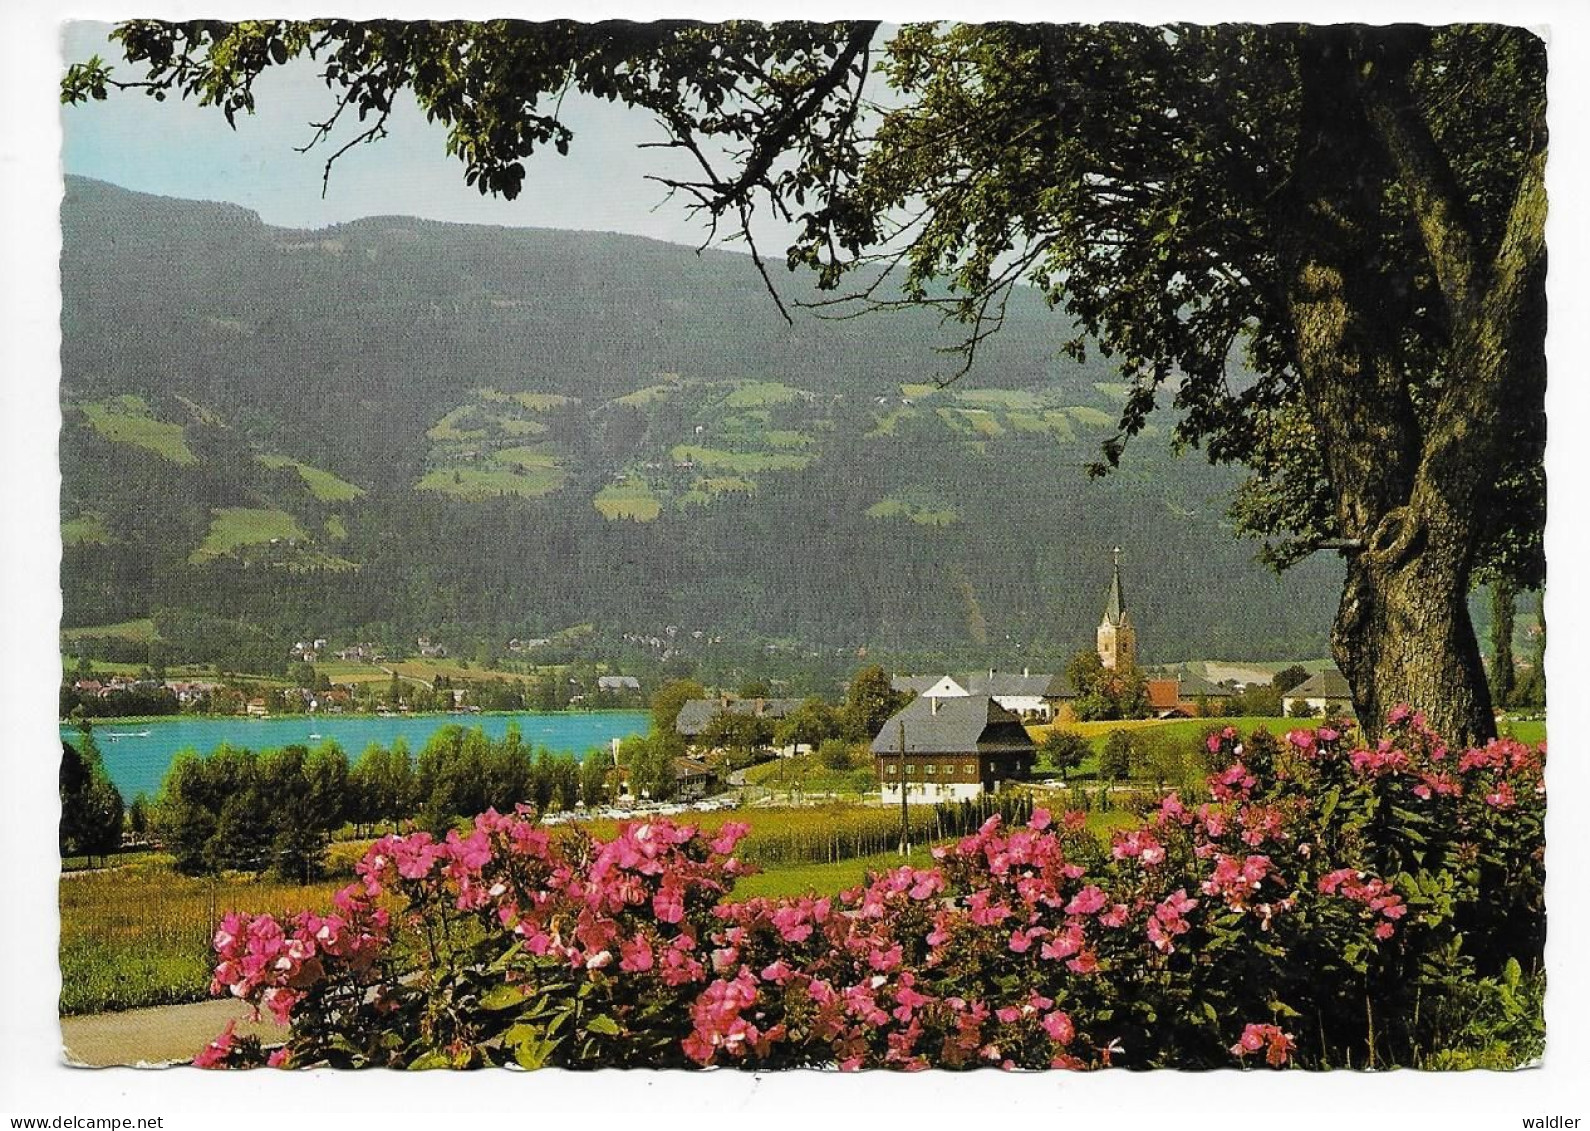 9570  OSSIACH AM SEE  --   1968 - Ossiachersee-Orte